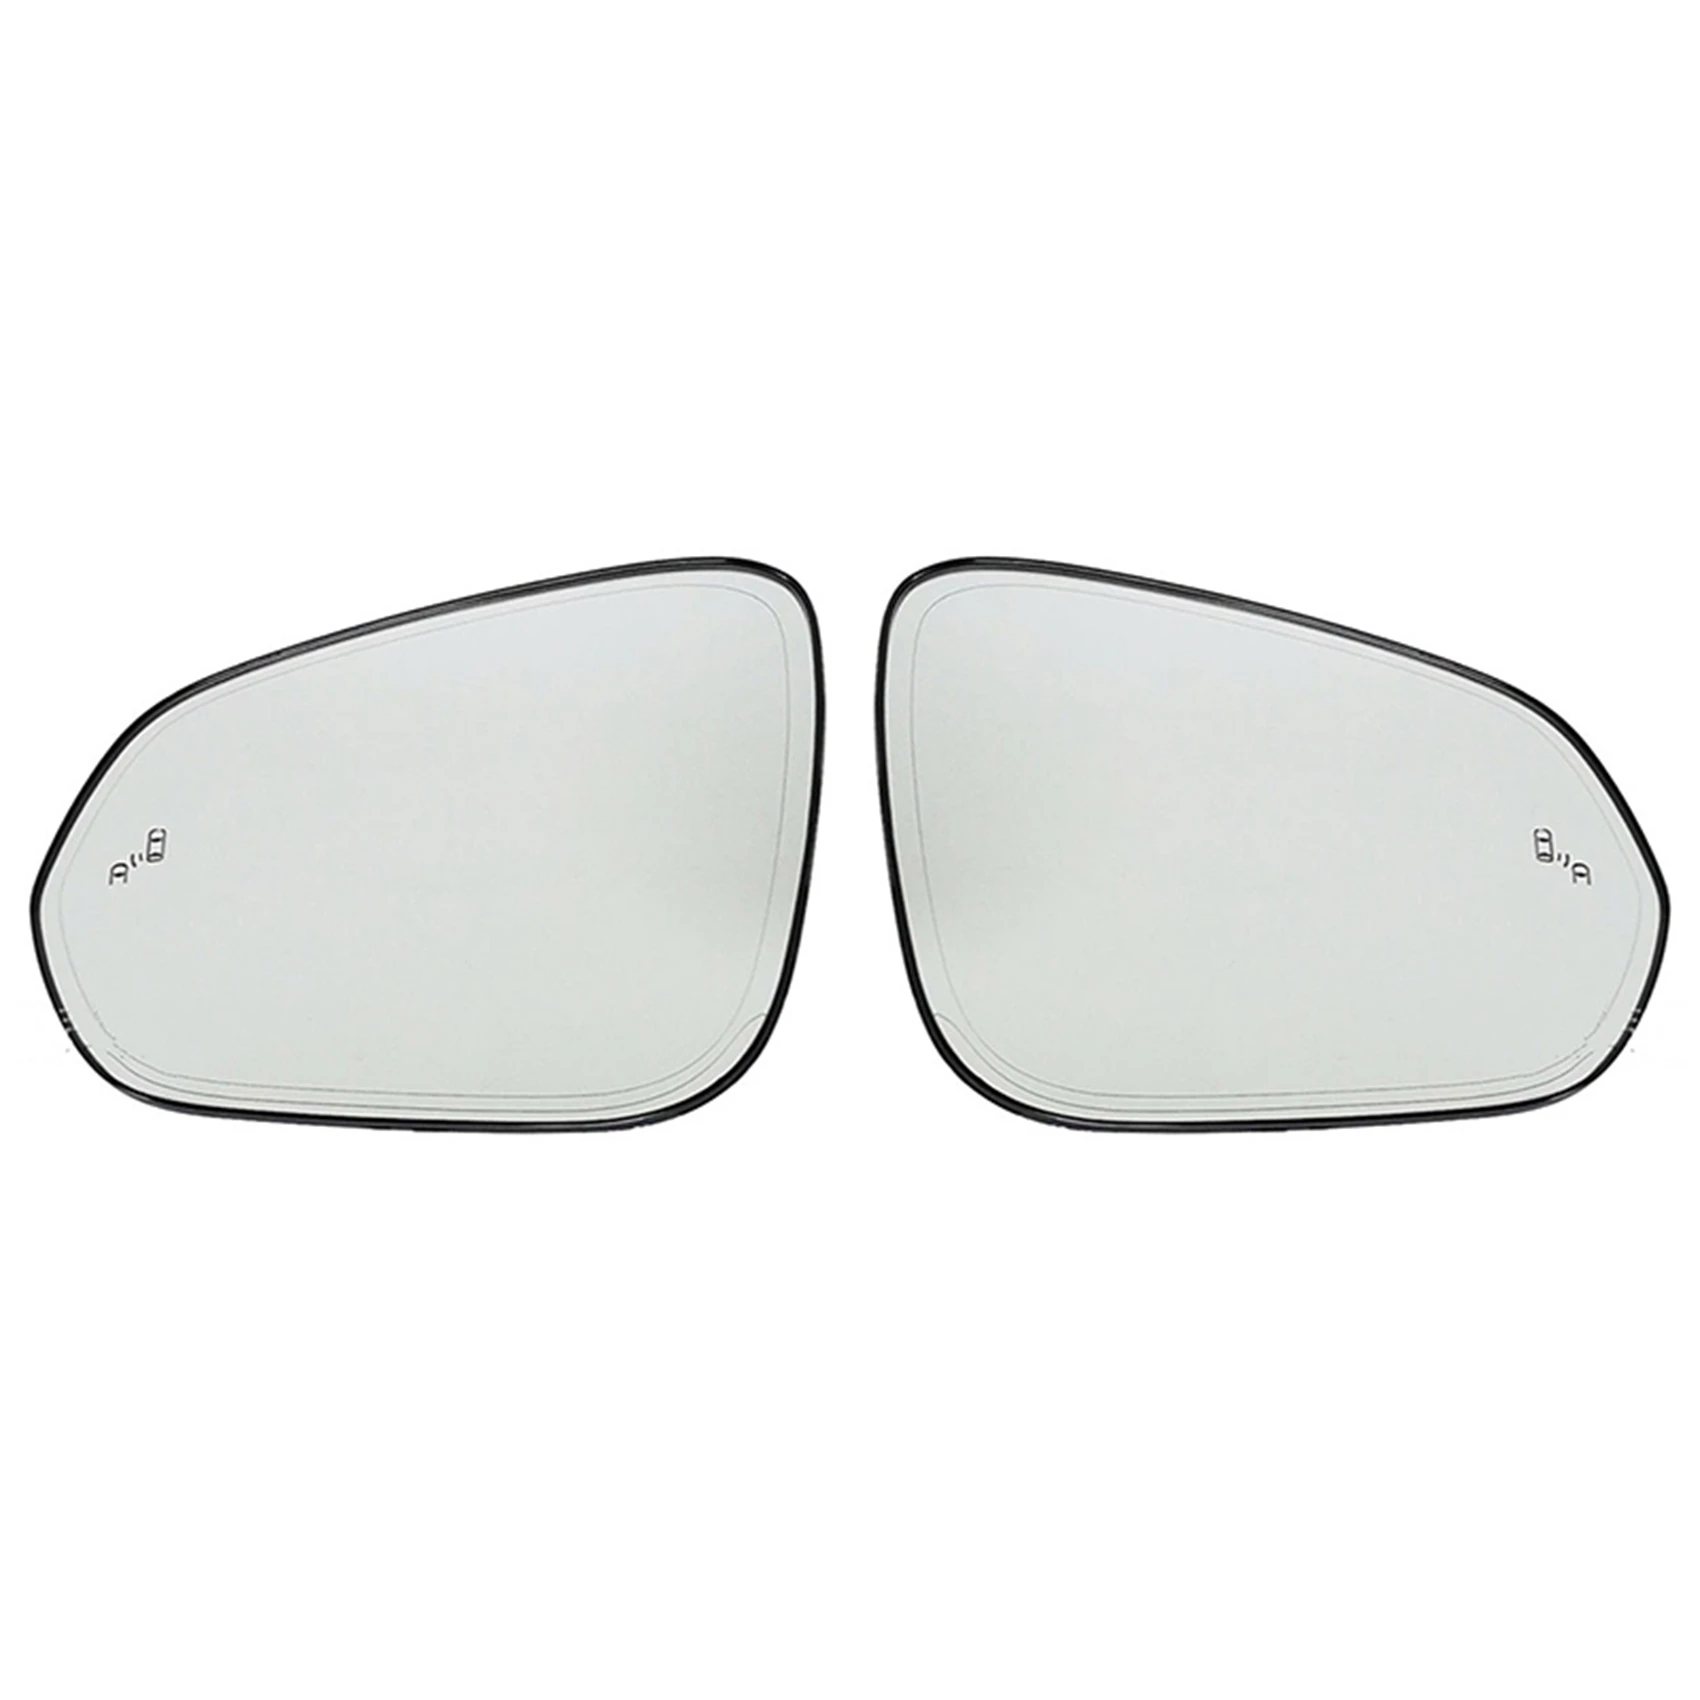 

Car Rear Mirror Glass Heated Blind Spot Wide Angle Lens for LEXUS RX NX NX200T RX350 NX300H RX450H 2015-2020